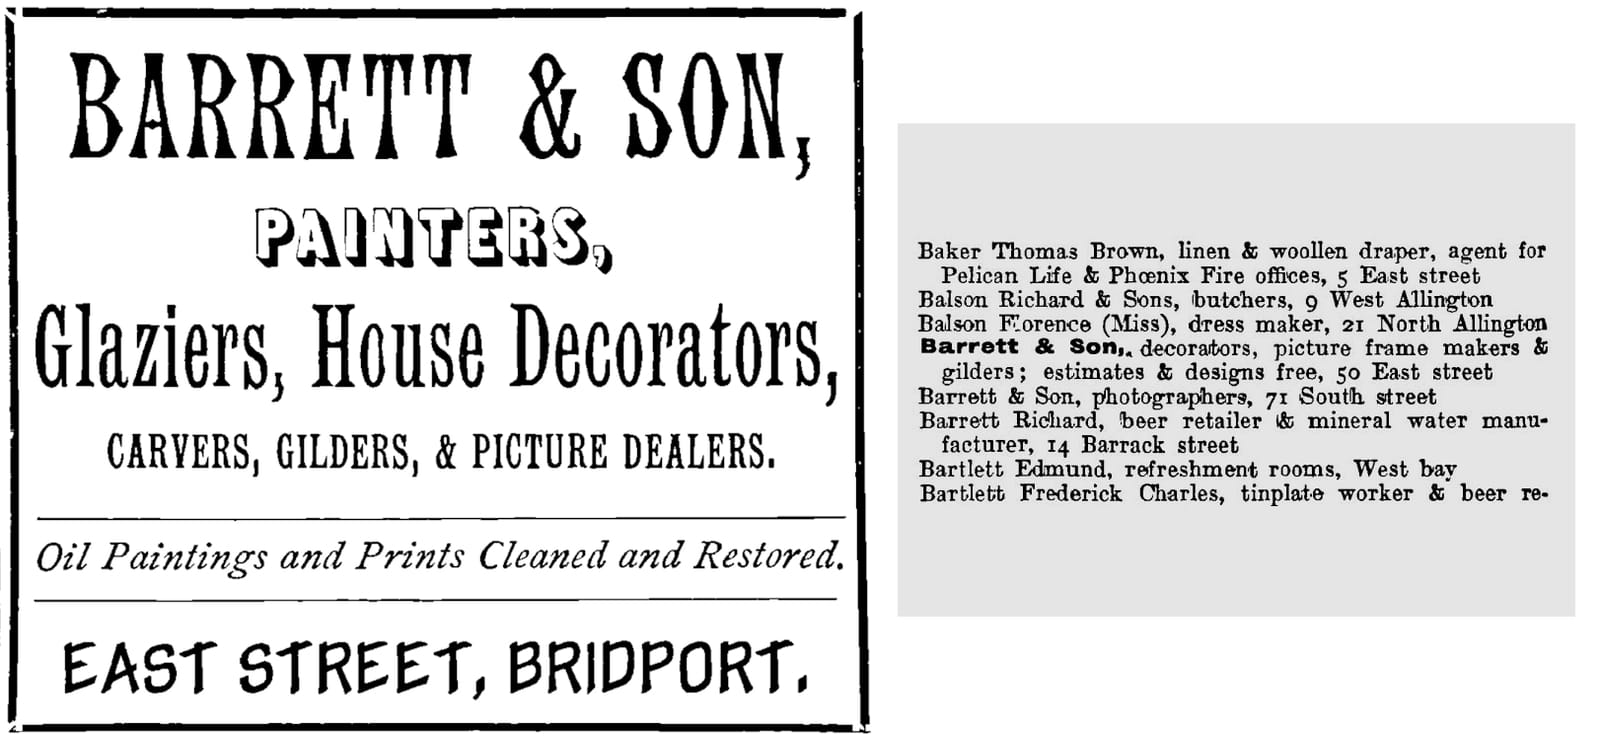 On the left is an advertisement set in a variety of typefaces, and which reads: "Barrett & Son, painters, glaziers, house decorators, carvers, gilders, & picture dealers. Oil paintings and prints cleaned and restored. East Street, Bridport". On the right is a section of a street directory showing various businesses beginning with the letter B, including "Barrett & Son, decorators, picture frame makers & gilders; estimates & design free, 50 East Street".